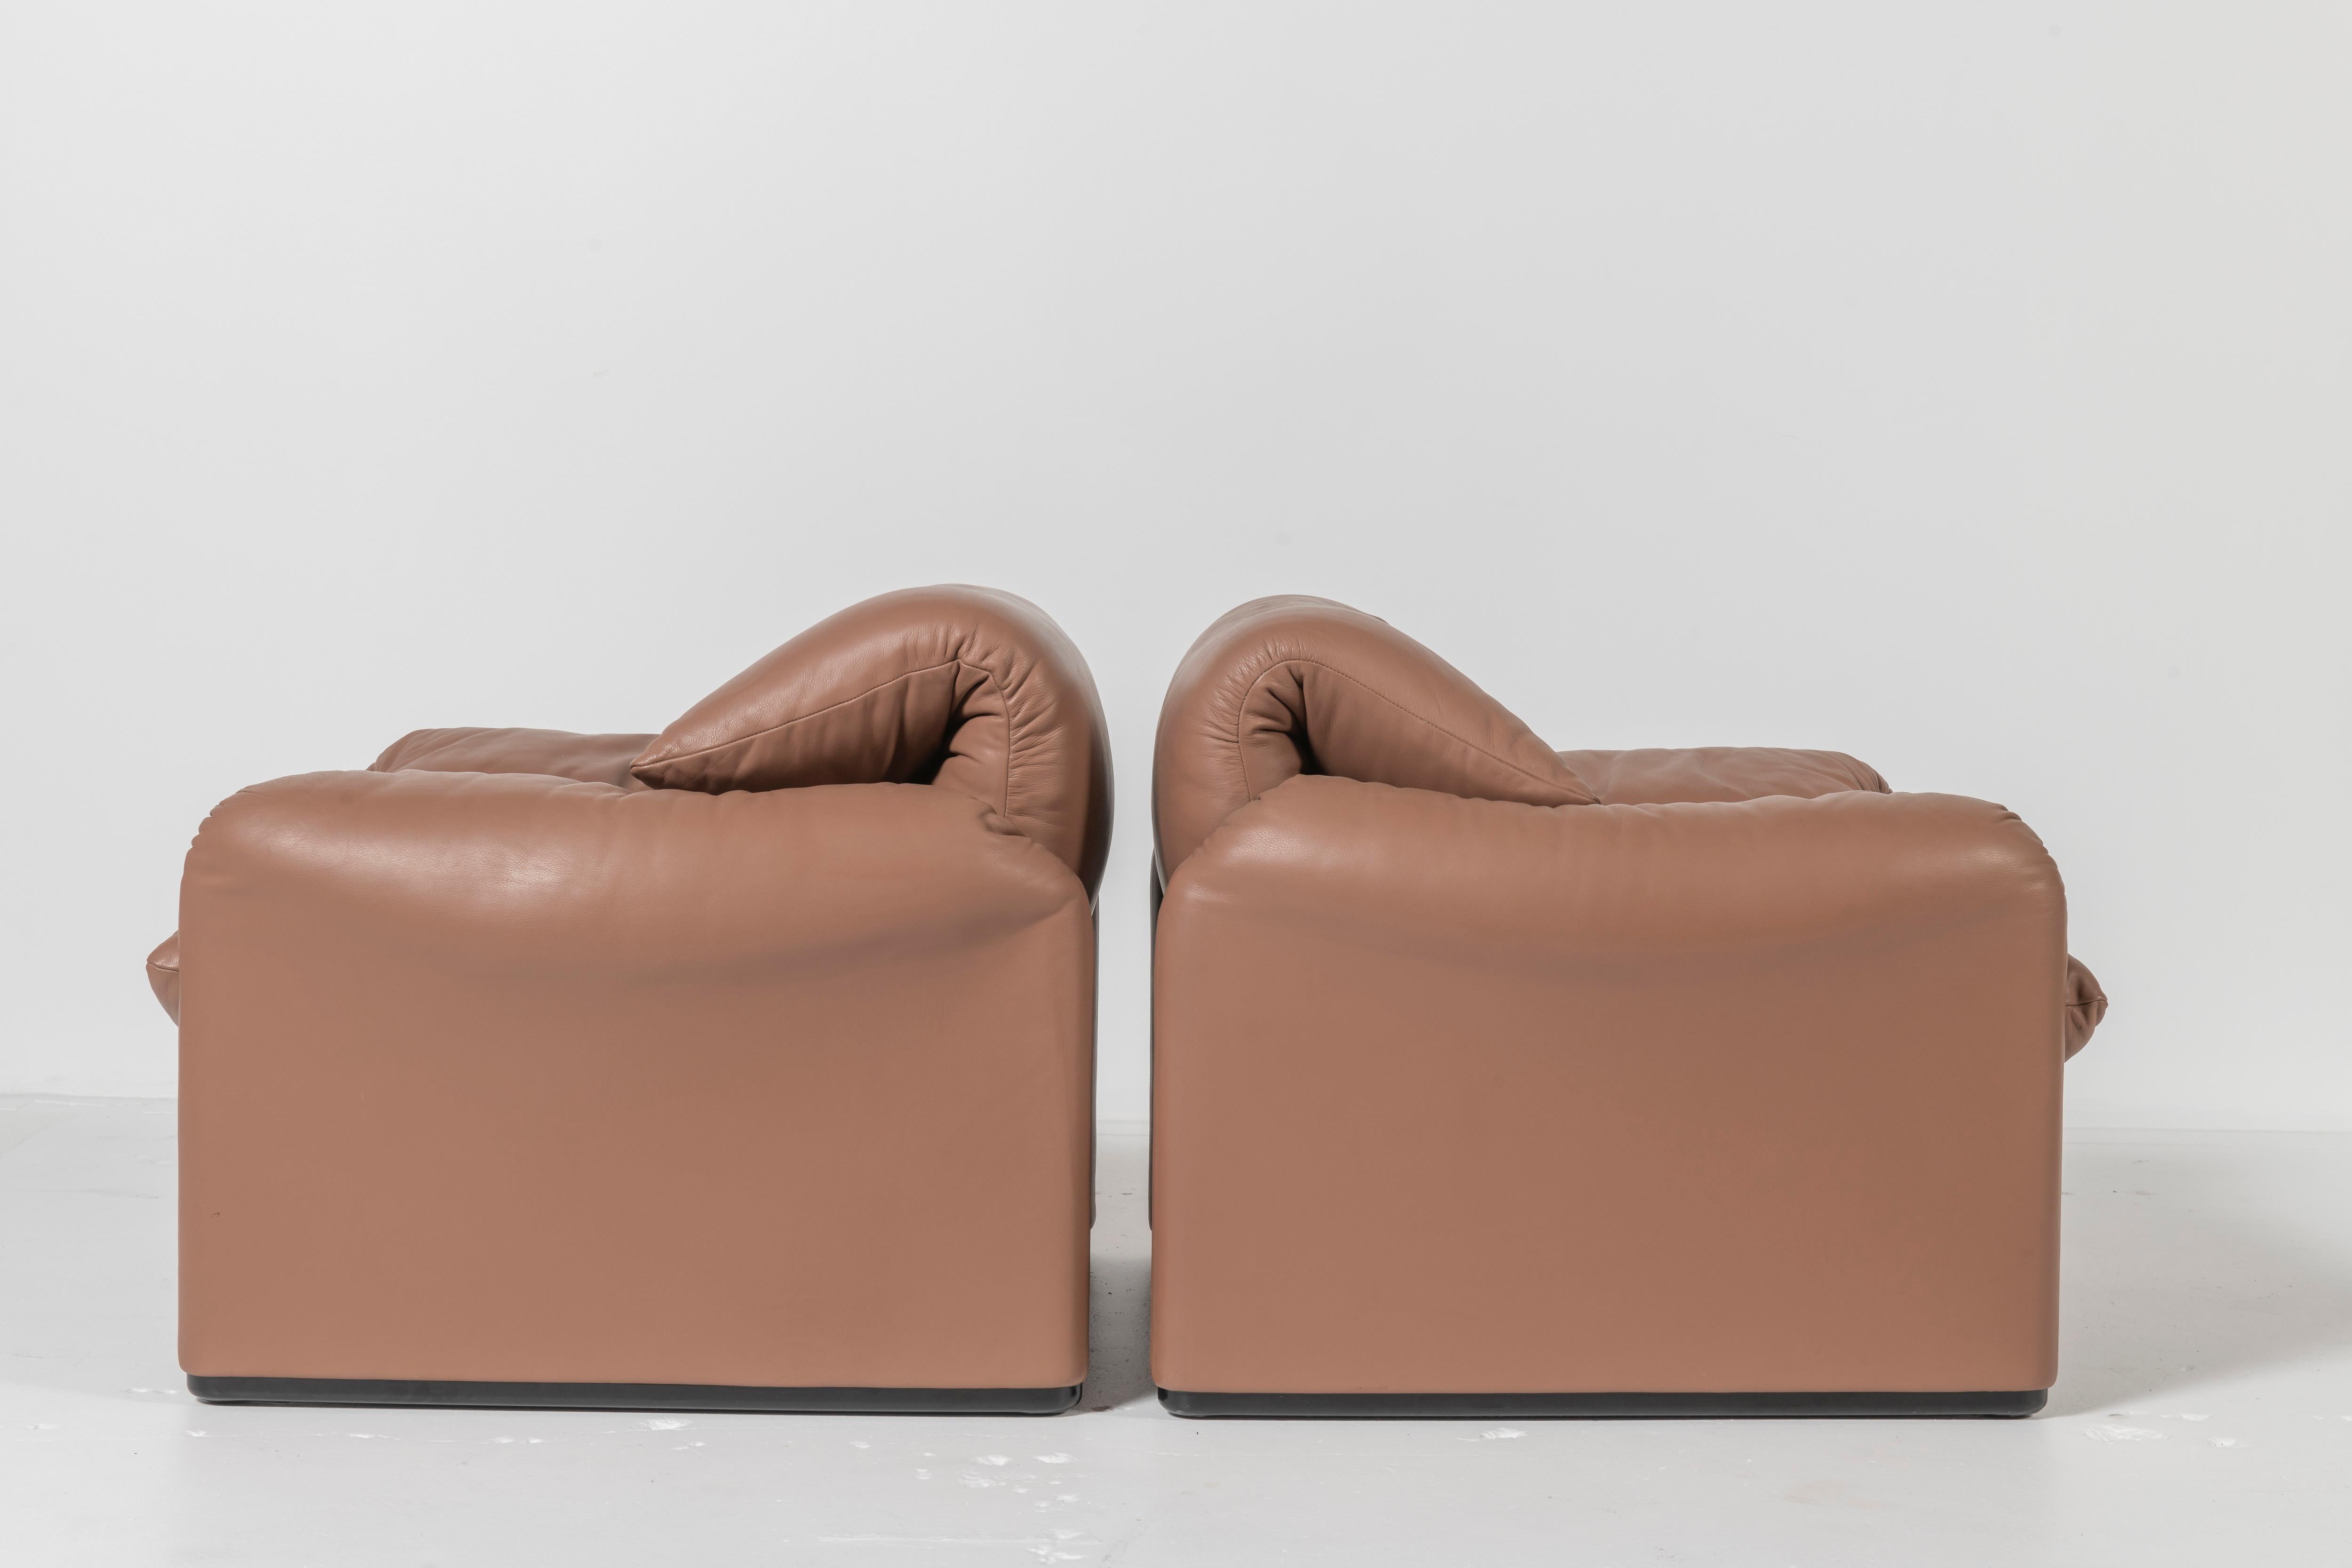 Pair of Maralunga Lounge Chairs with Ottoman in Tan Leather by Cassina 5